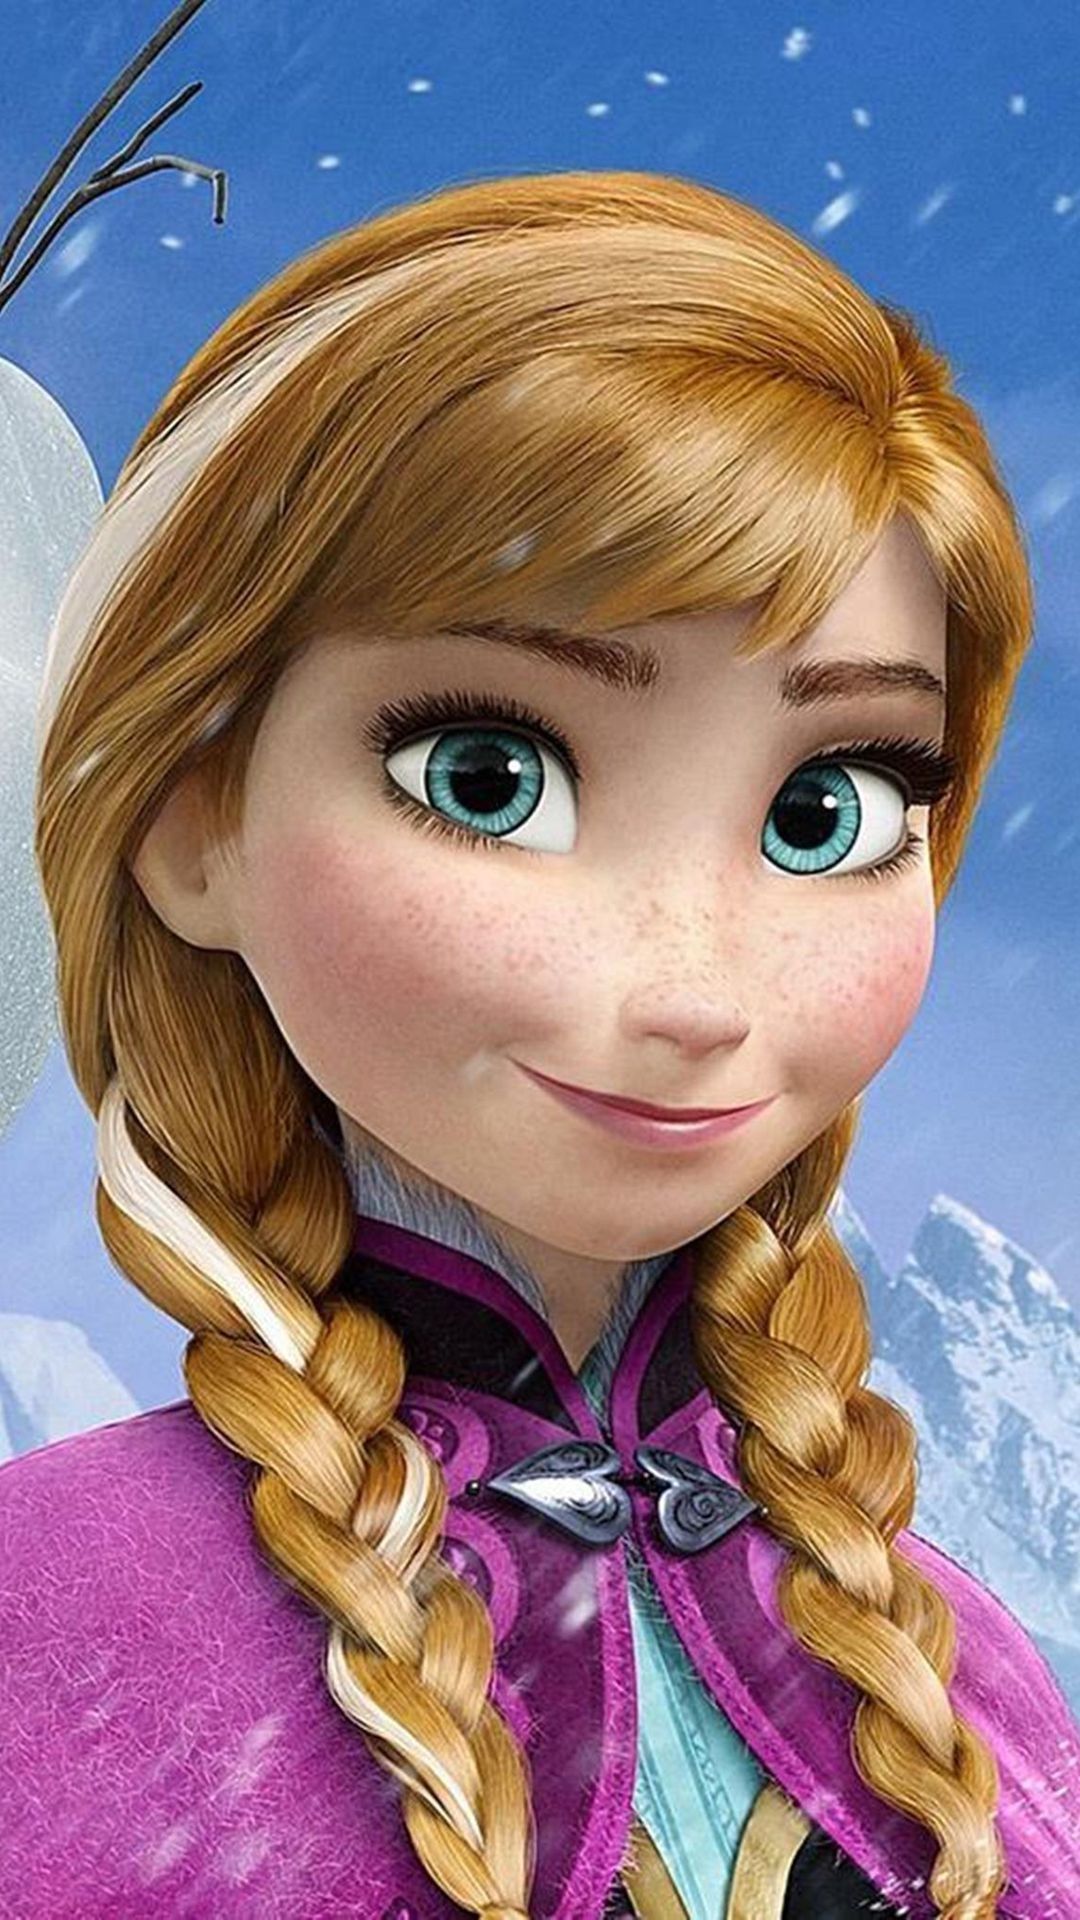 Frozen Anna htc one wallpaper, free and easy to download